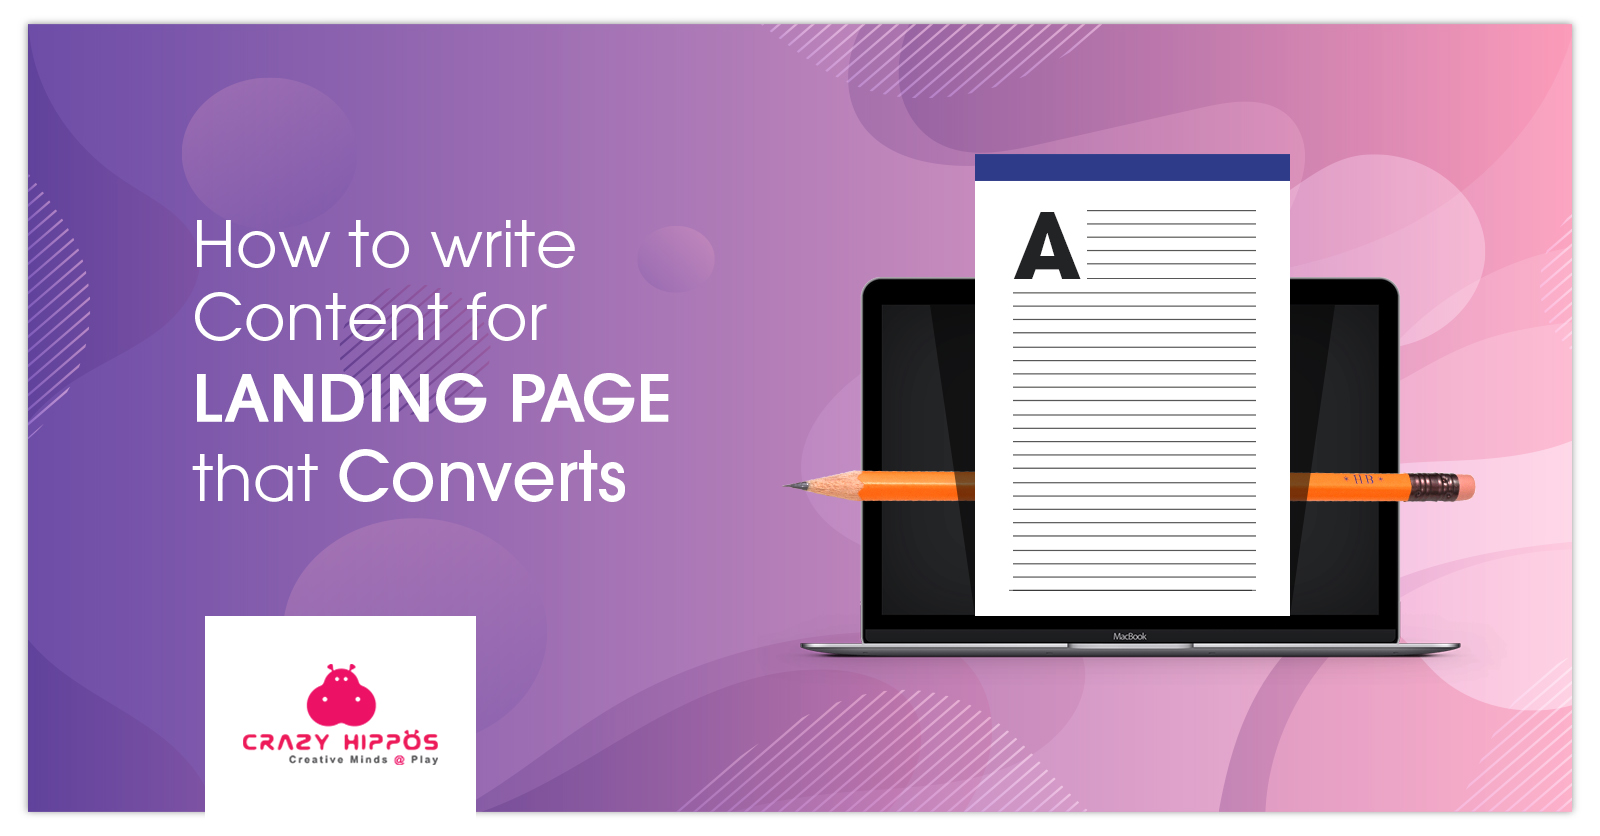 HOW-TO-WRITE-CONTENT-FOR-LANDING-PAGE-THAT-CONVERTS